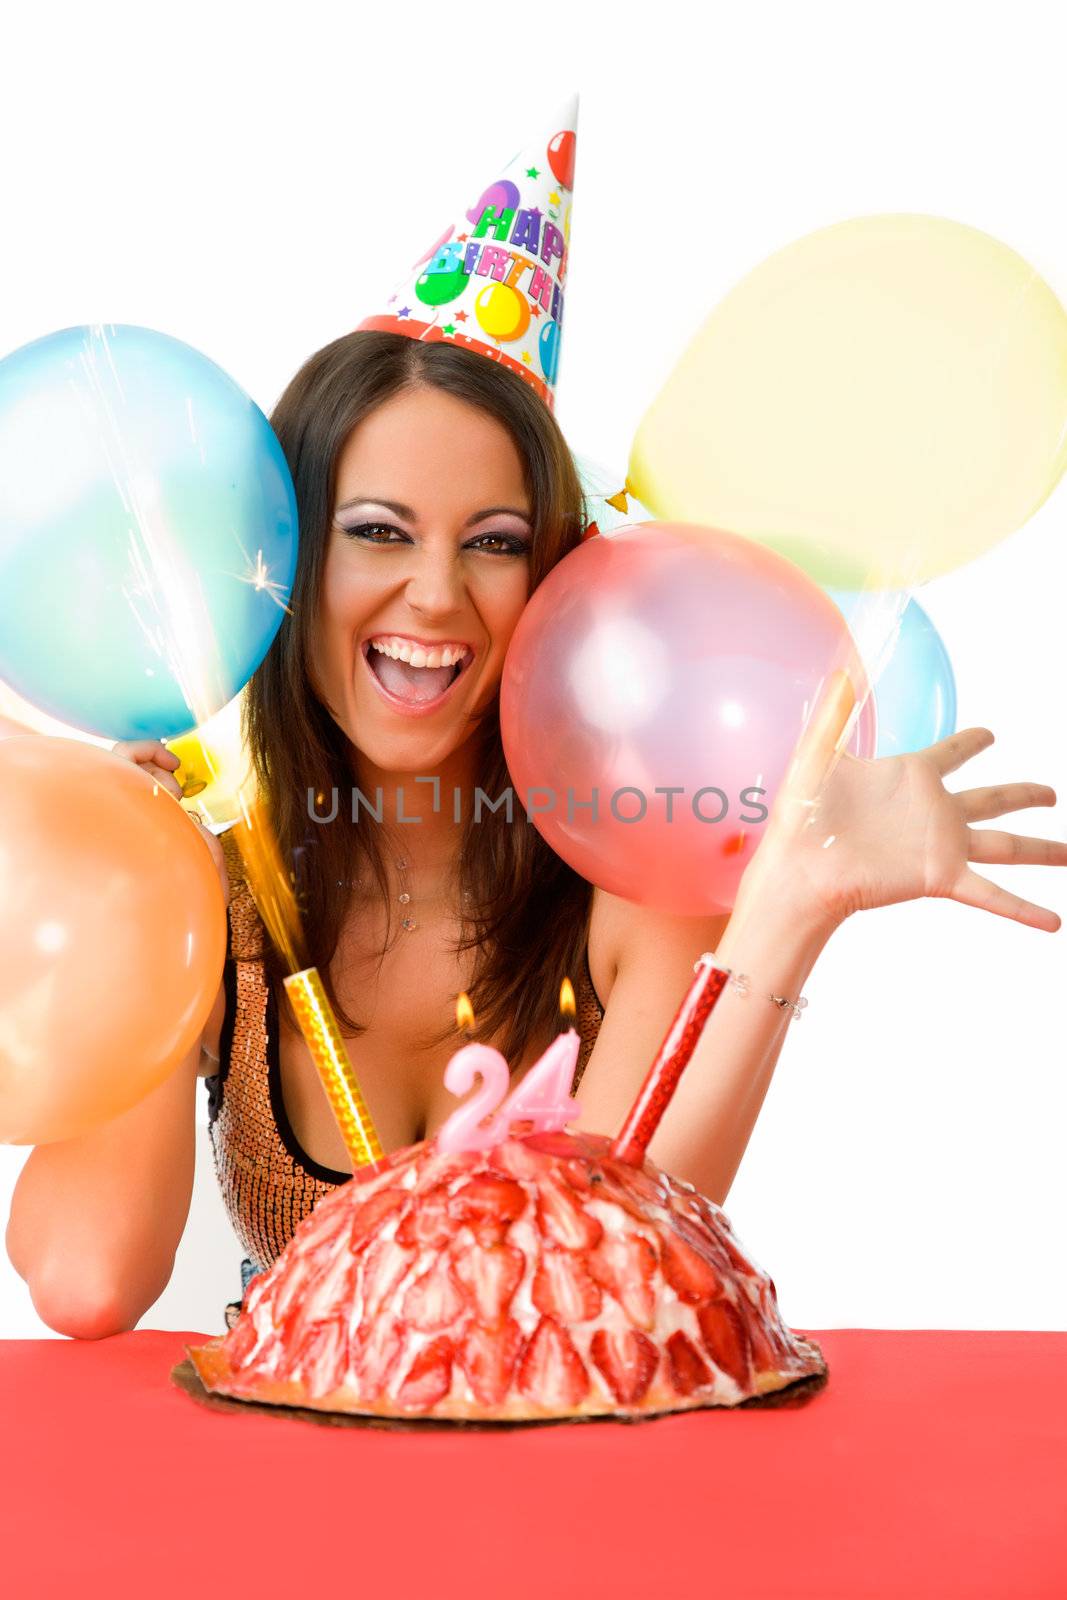 Beautiful happy female with party hat celebrating birthday over cake with candles